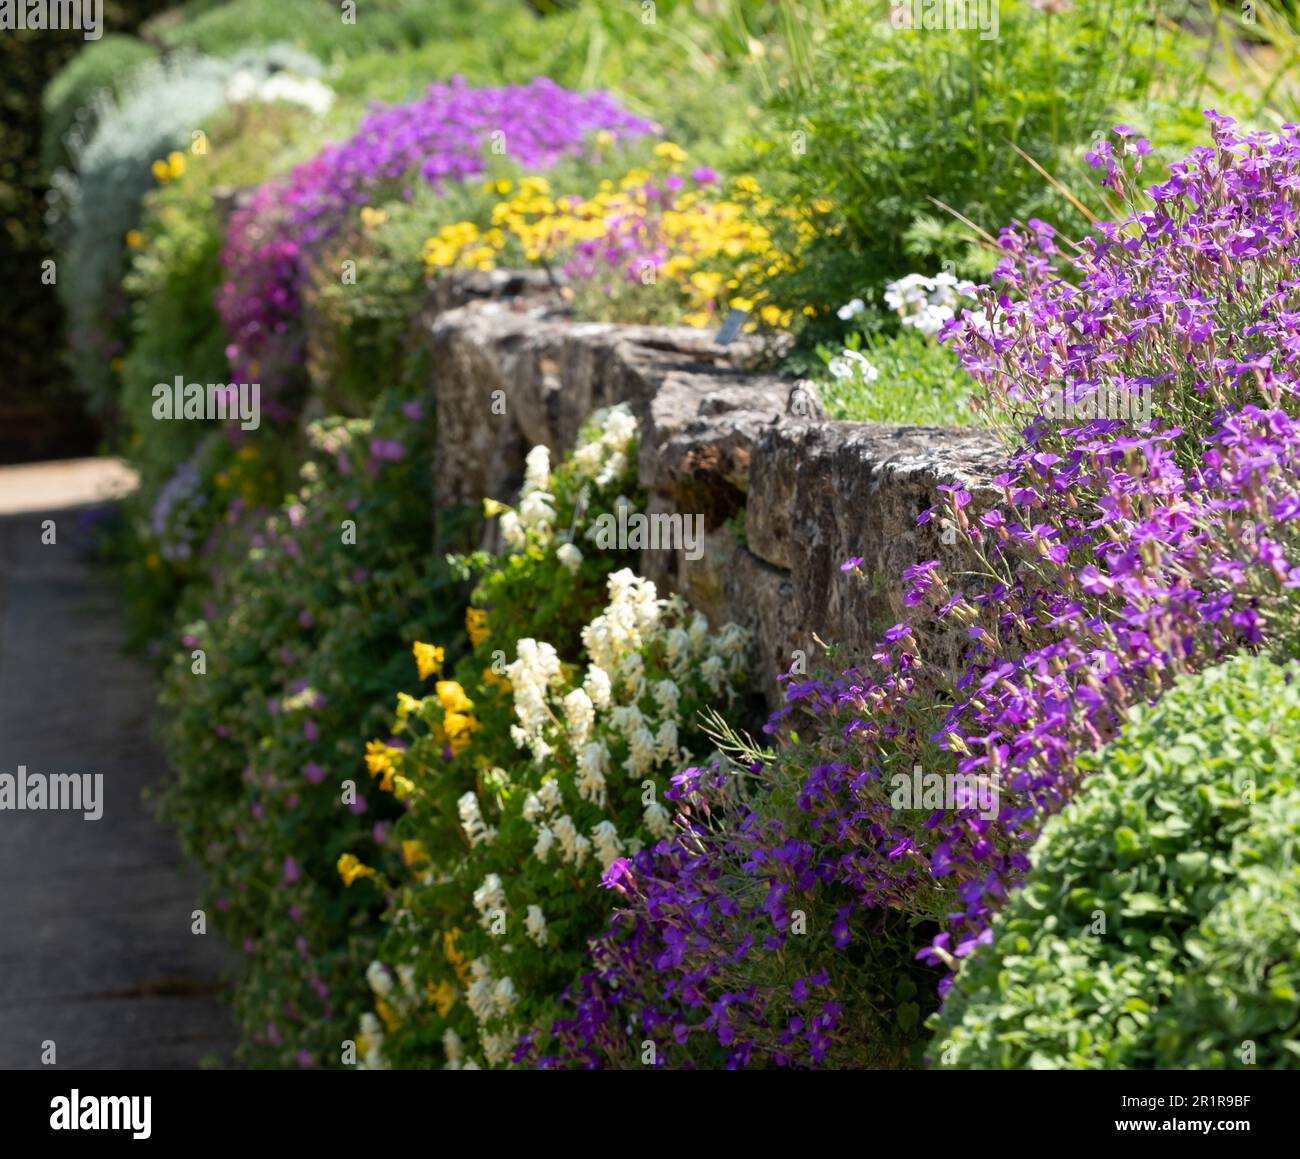 Colourful purple and pink flowered aubretia trailing plants growing on a low rockery wall in Wisley, Surrey UK. Stock Photo